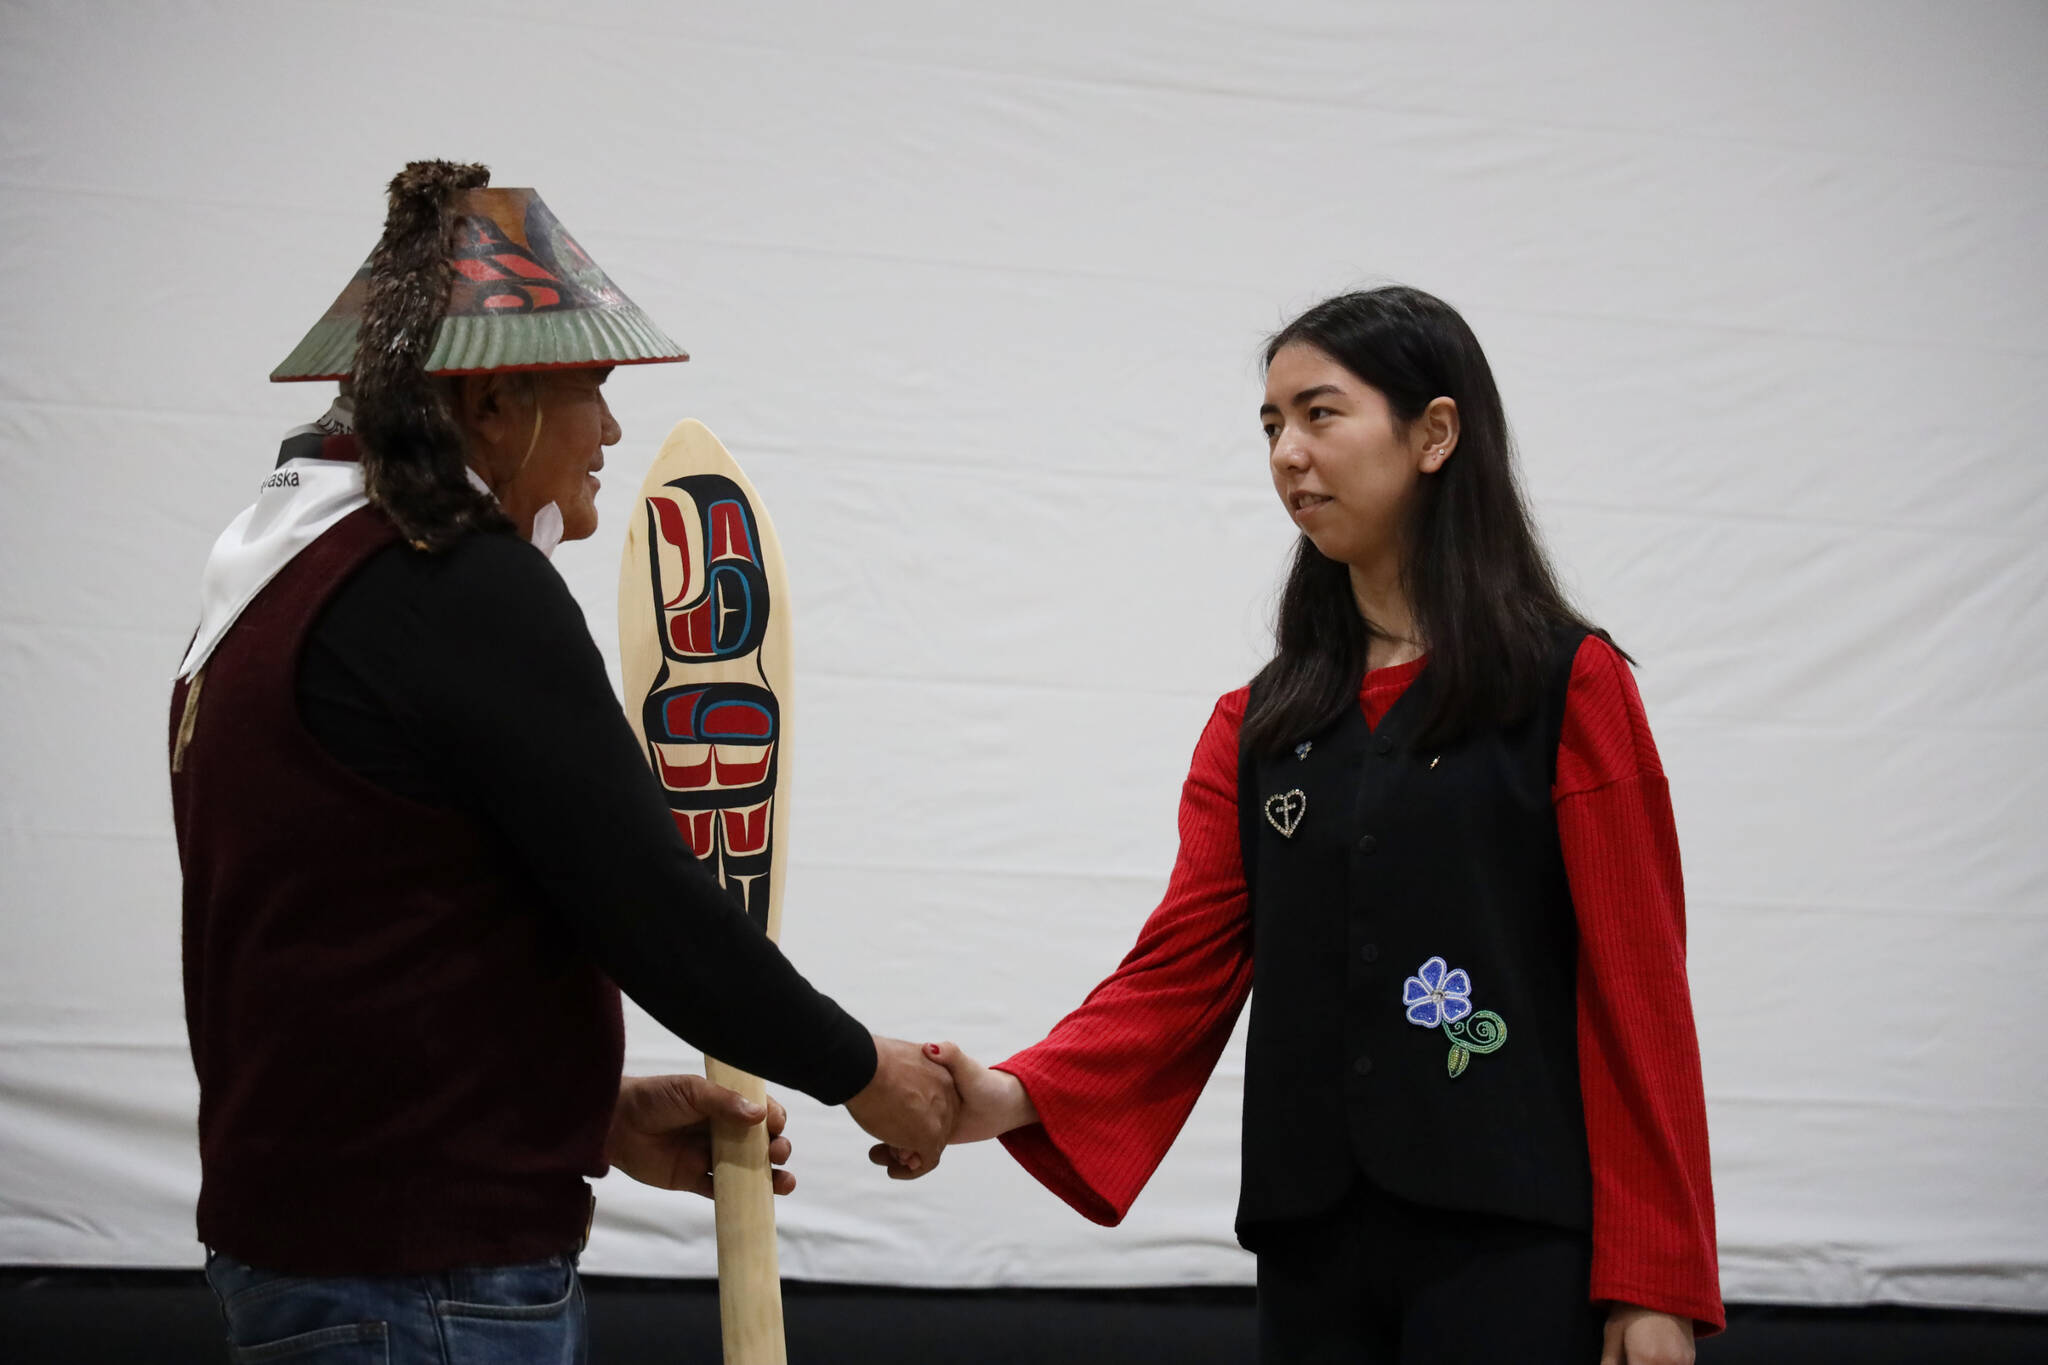 Tlingit master carver Wayne Price shakes hands with a student from Chatham School District after being gifted a painted wooden paddle made by the students. (Clarise Larson / Juneau Empire)